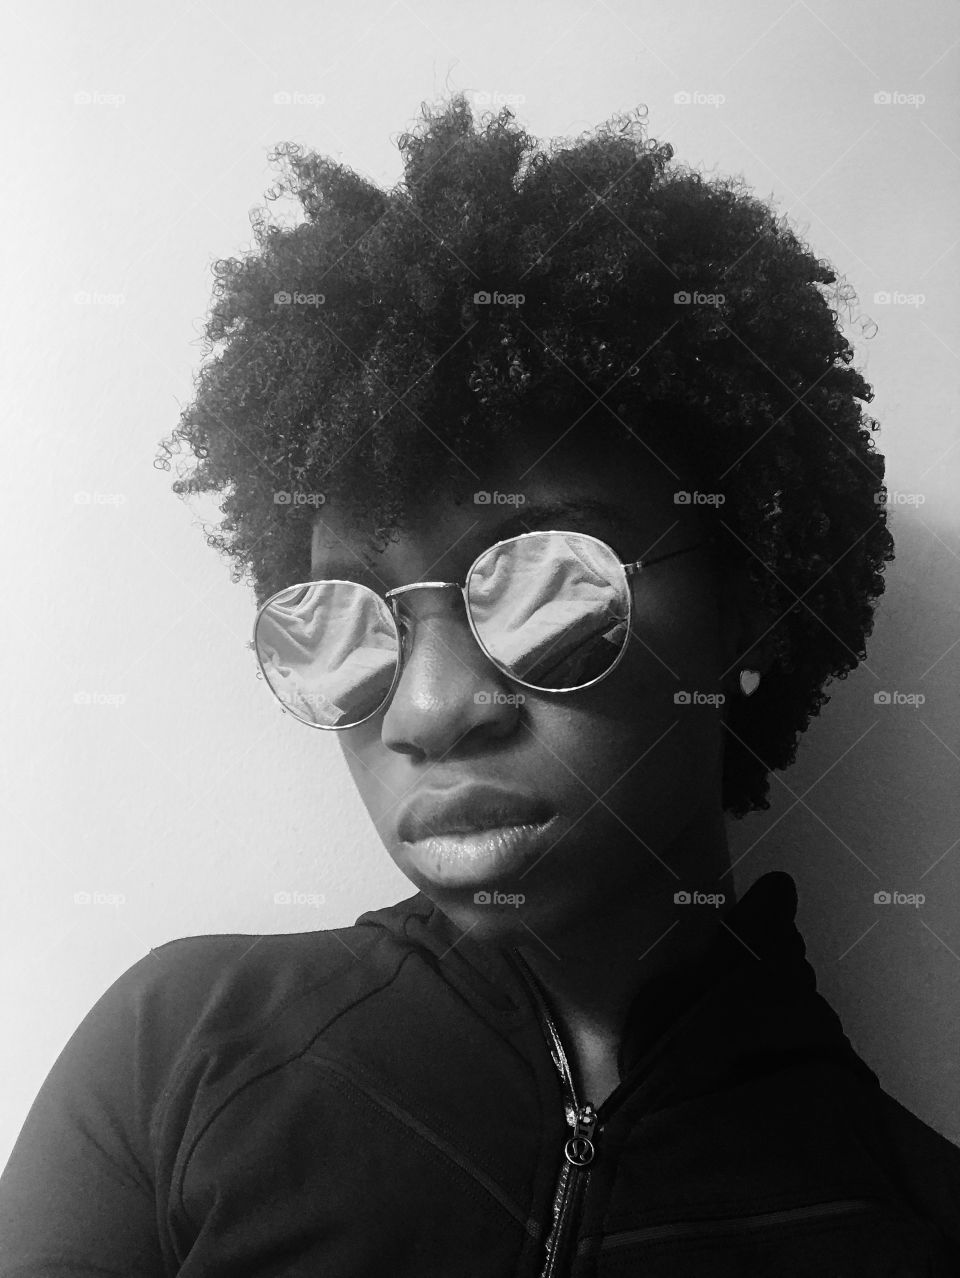 Girl with Natural hair, shades, and an even shadier glare